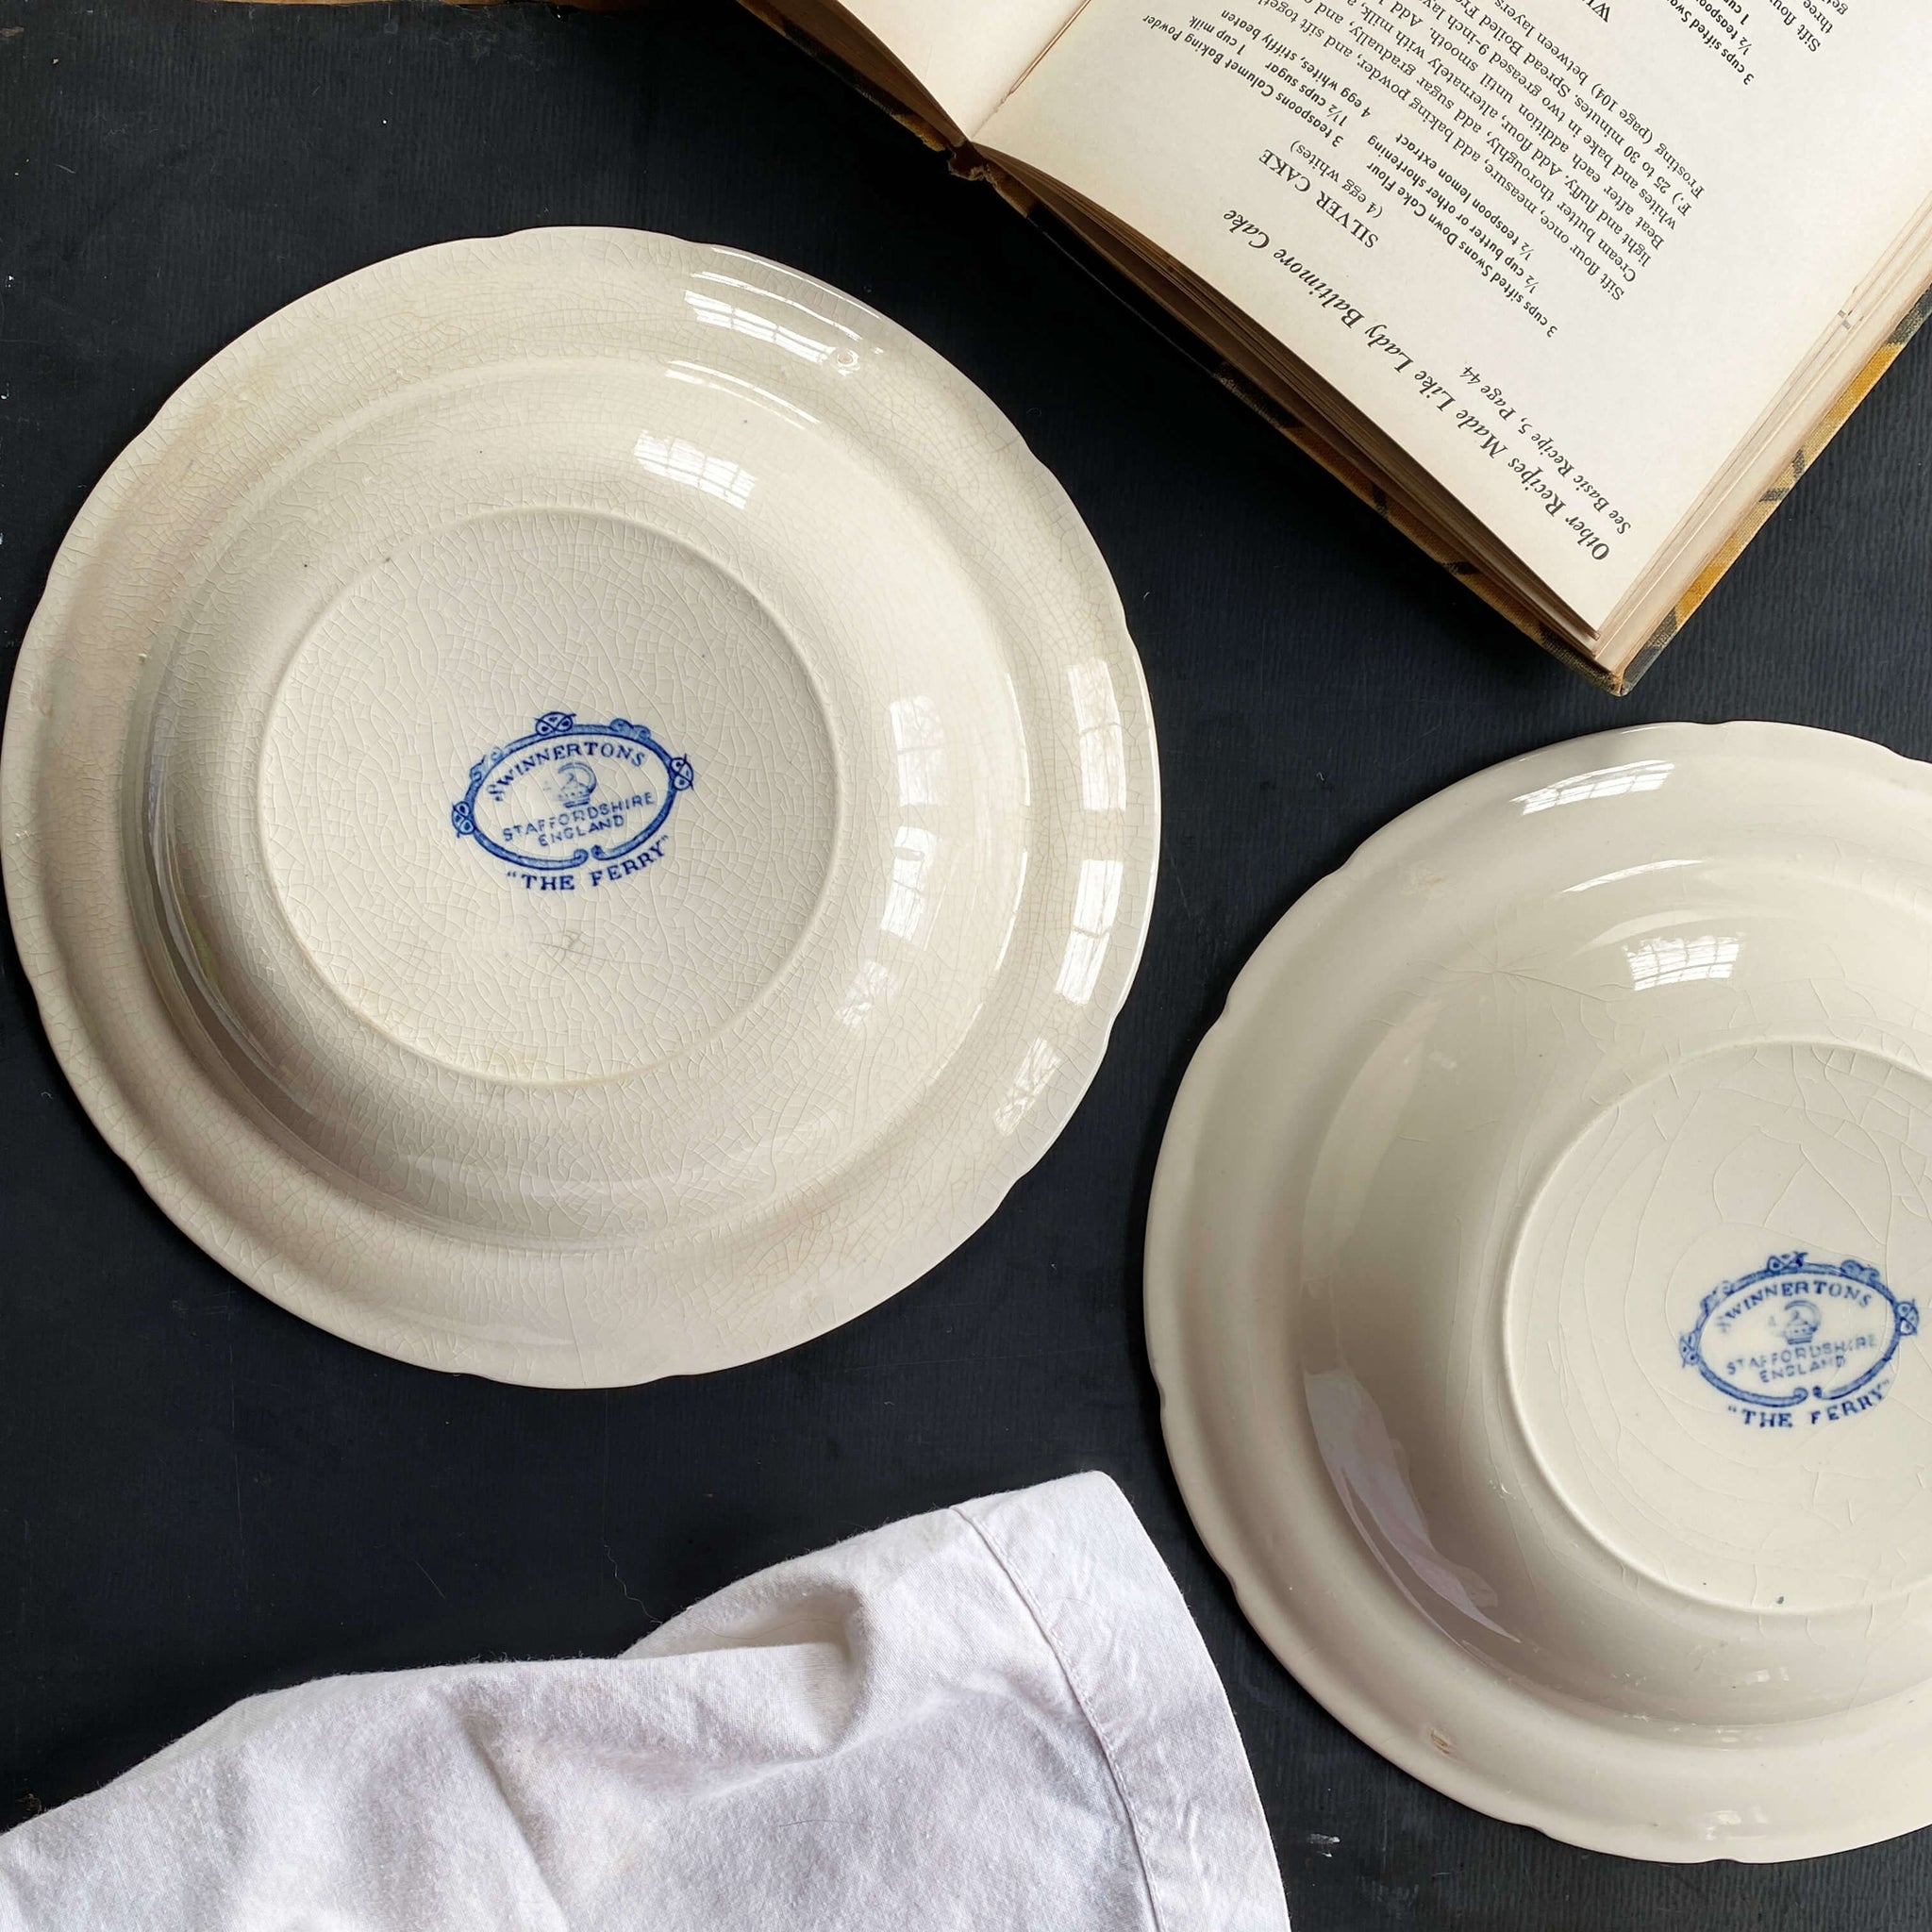 Vintage Swinnertons Blue Ferry Coupe Bowls circa 1940s - Set of Two